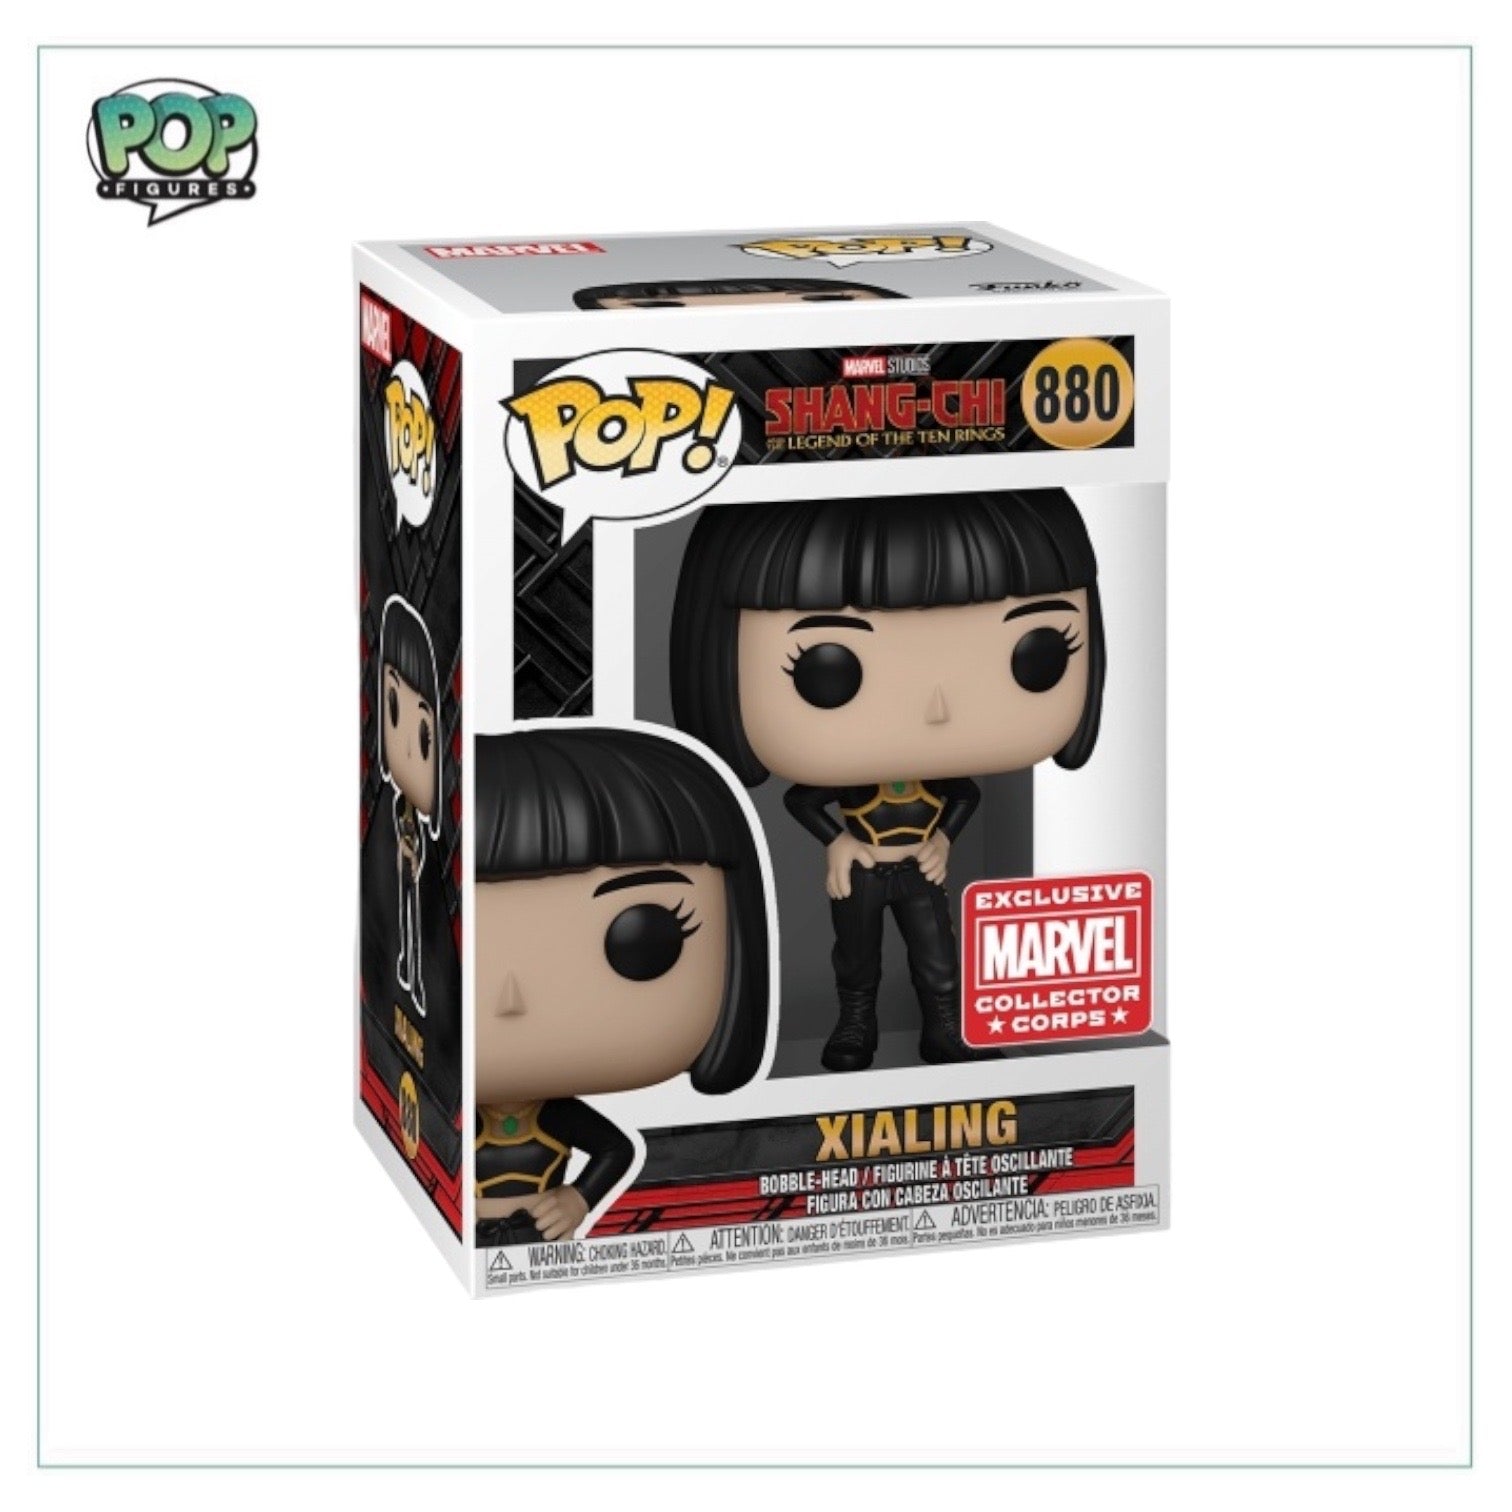 Xialing #880 (Black) Funko Pop! - Shang-Chi And The Legend Of The Ten Rings - Marvel Collector Corps Exclusive